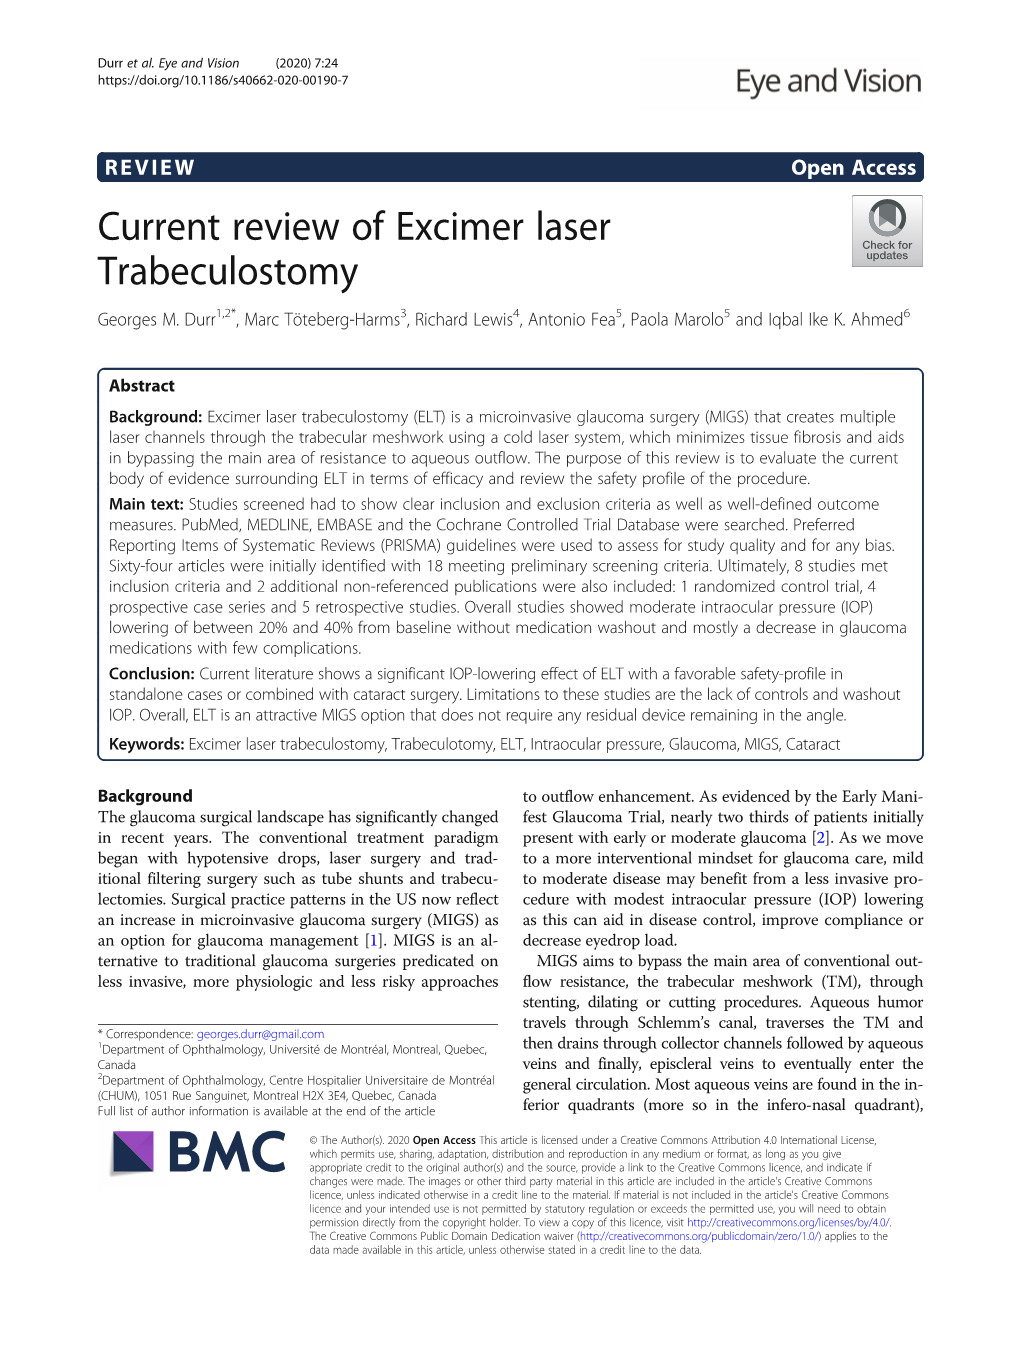 Current Review of Excimer Laser Trabeculostomy Georges M